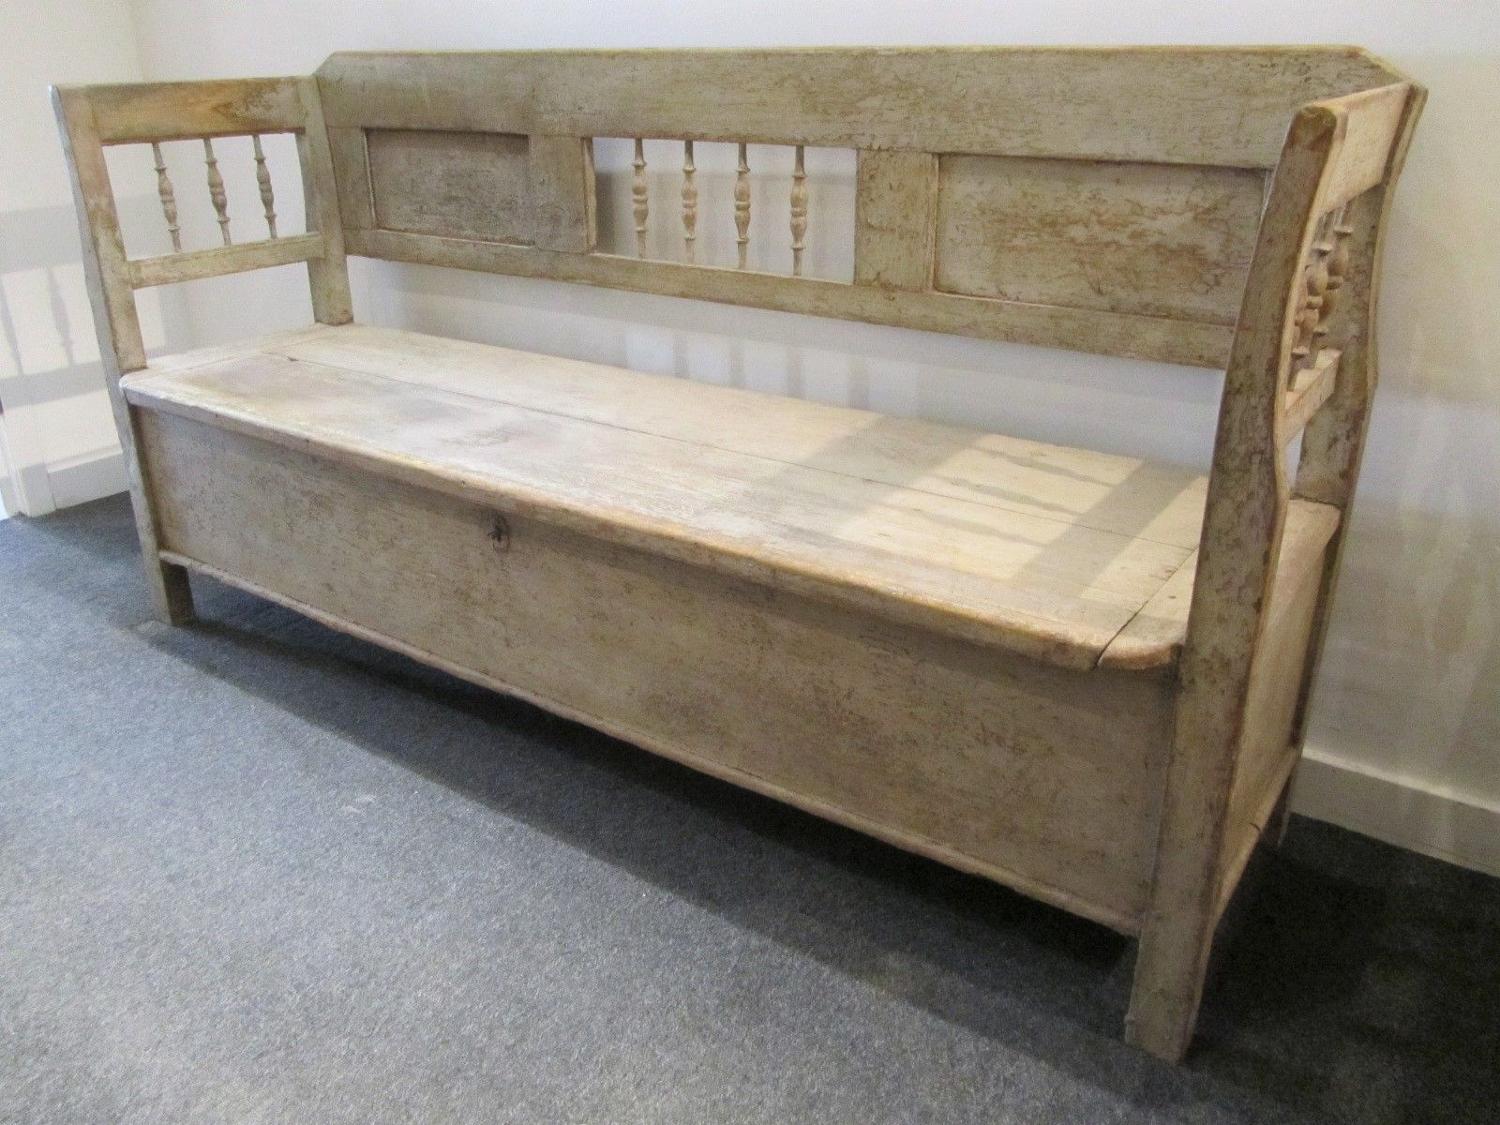 A Scandinavian bench with storage